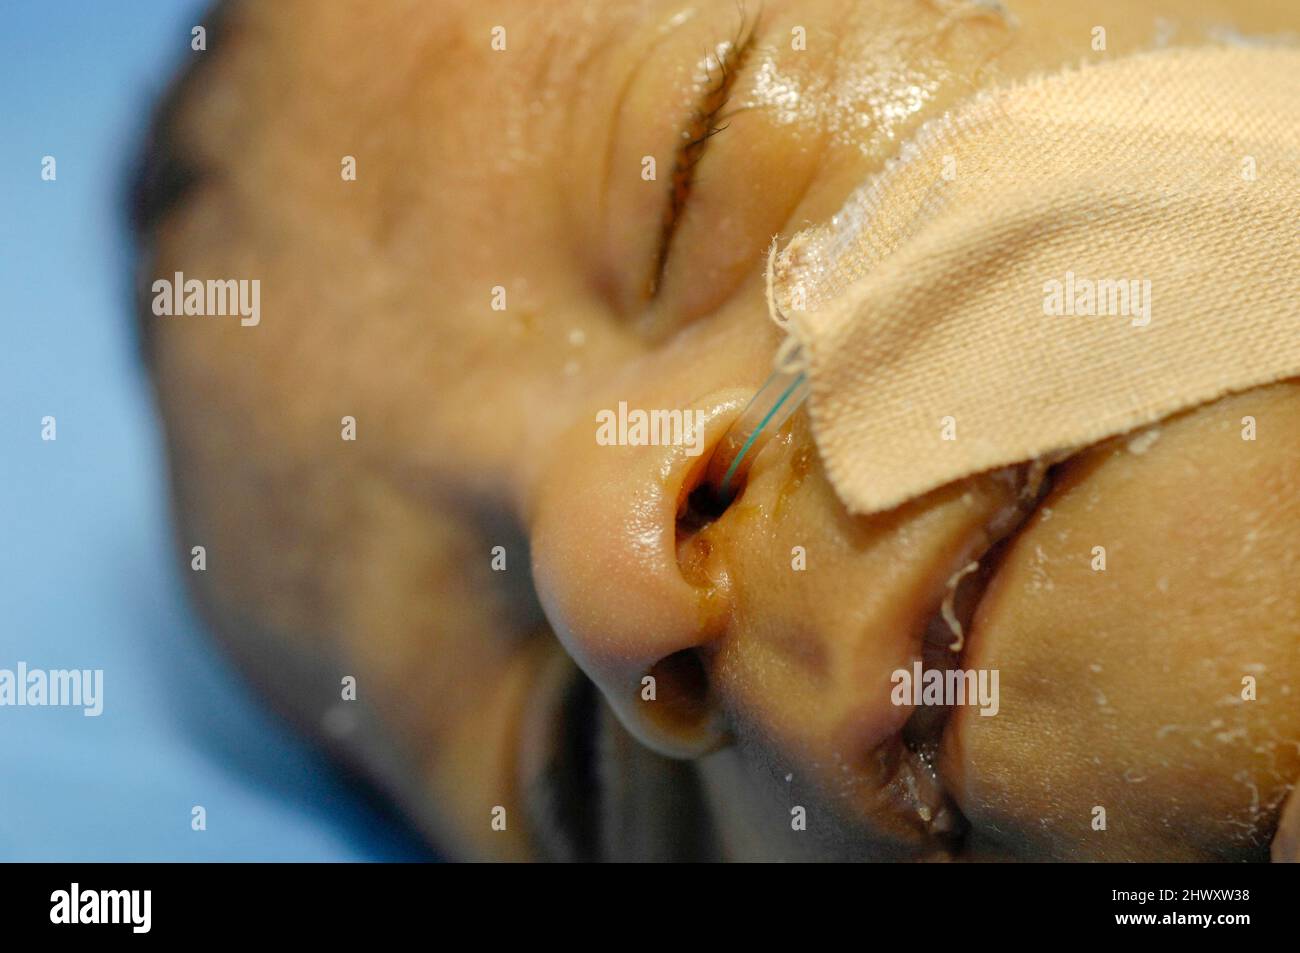 A close-up of a premature baby in an incubator in the neonatal unit of a hospital. Premature babies are placed in incubator as they have not fully dev Stock Photo